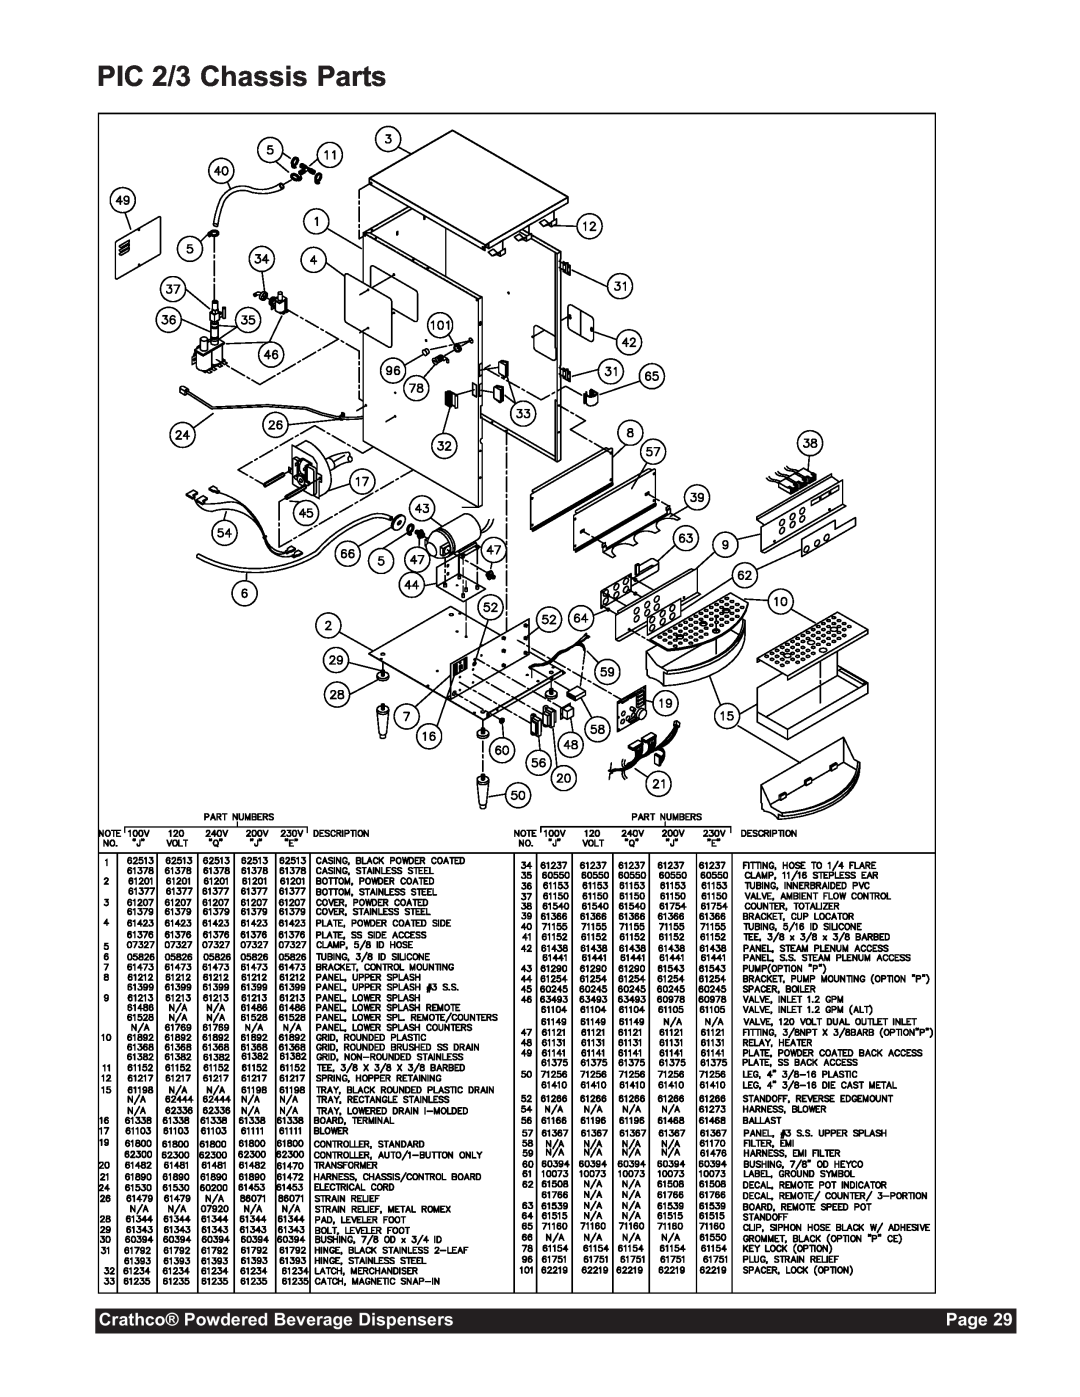 Grindmaster CC-302-20 service manual PIC 2/3 Chassis Parts, Crathco Powdered Beverage Dispensers, Page 